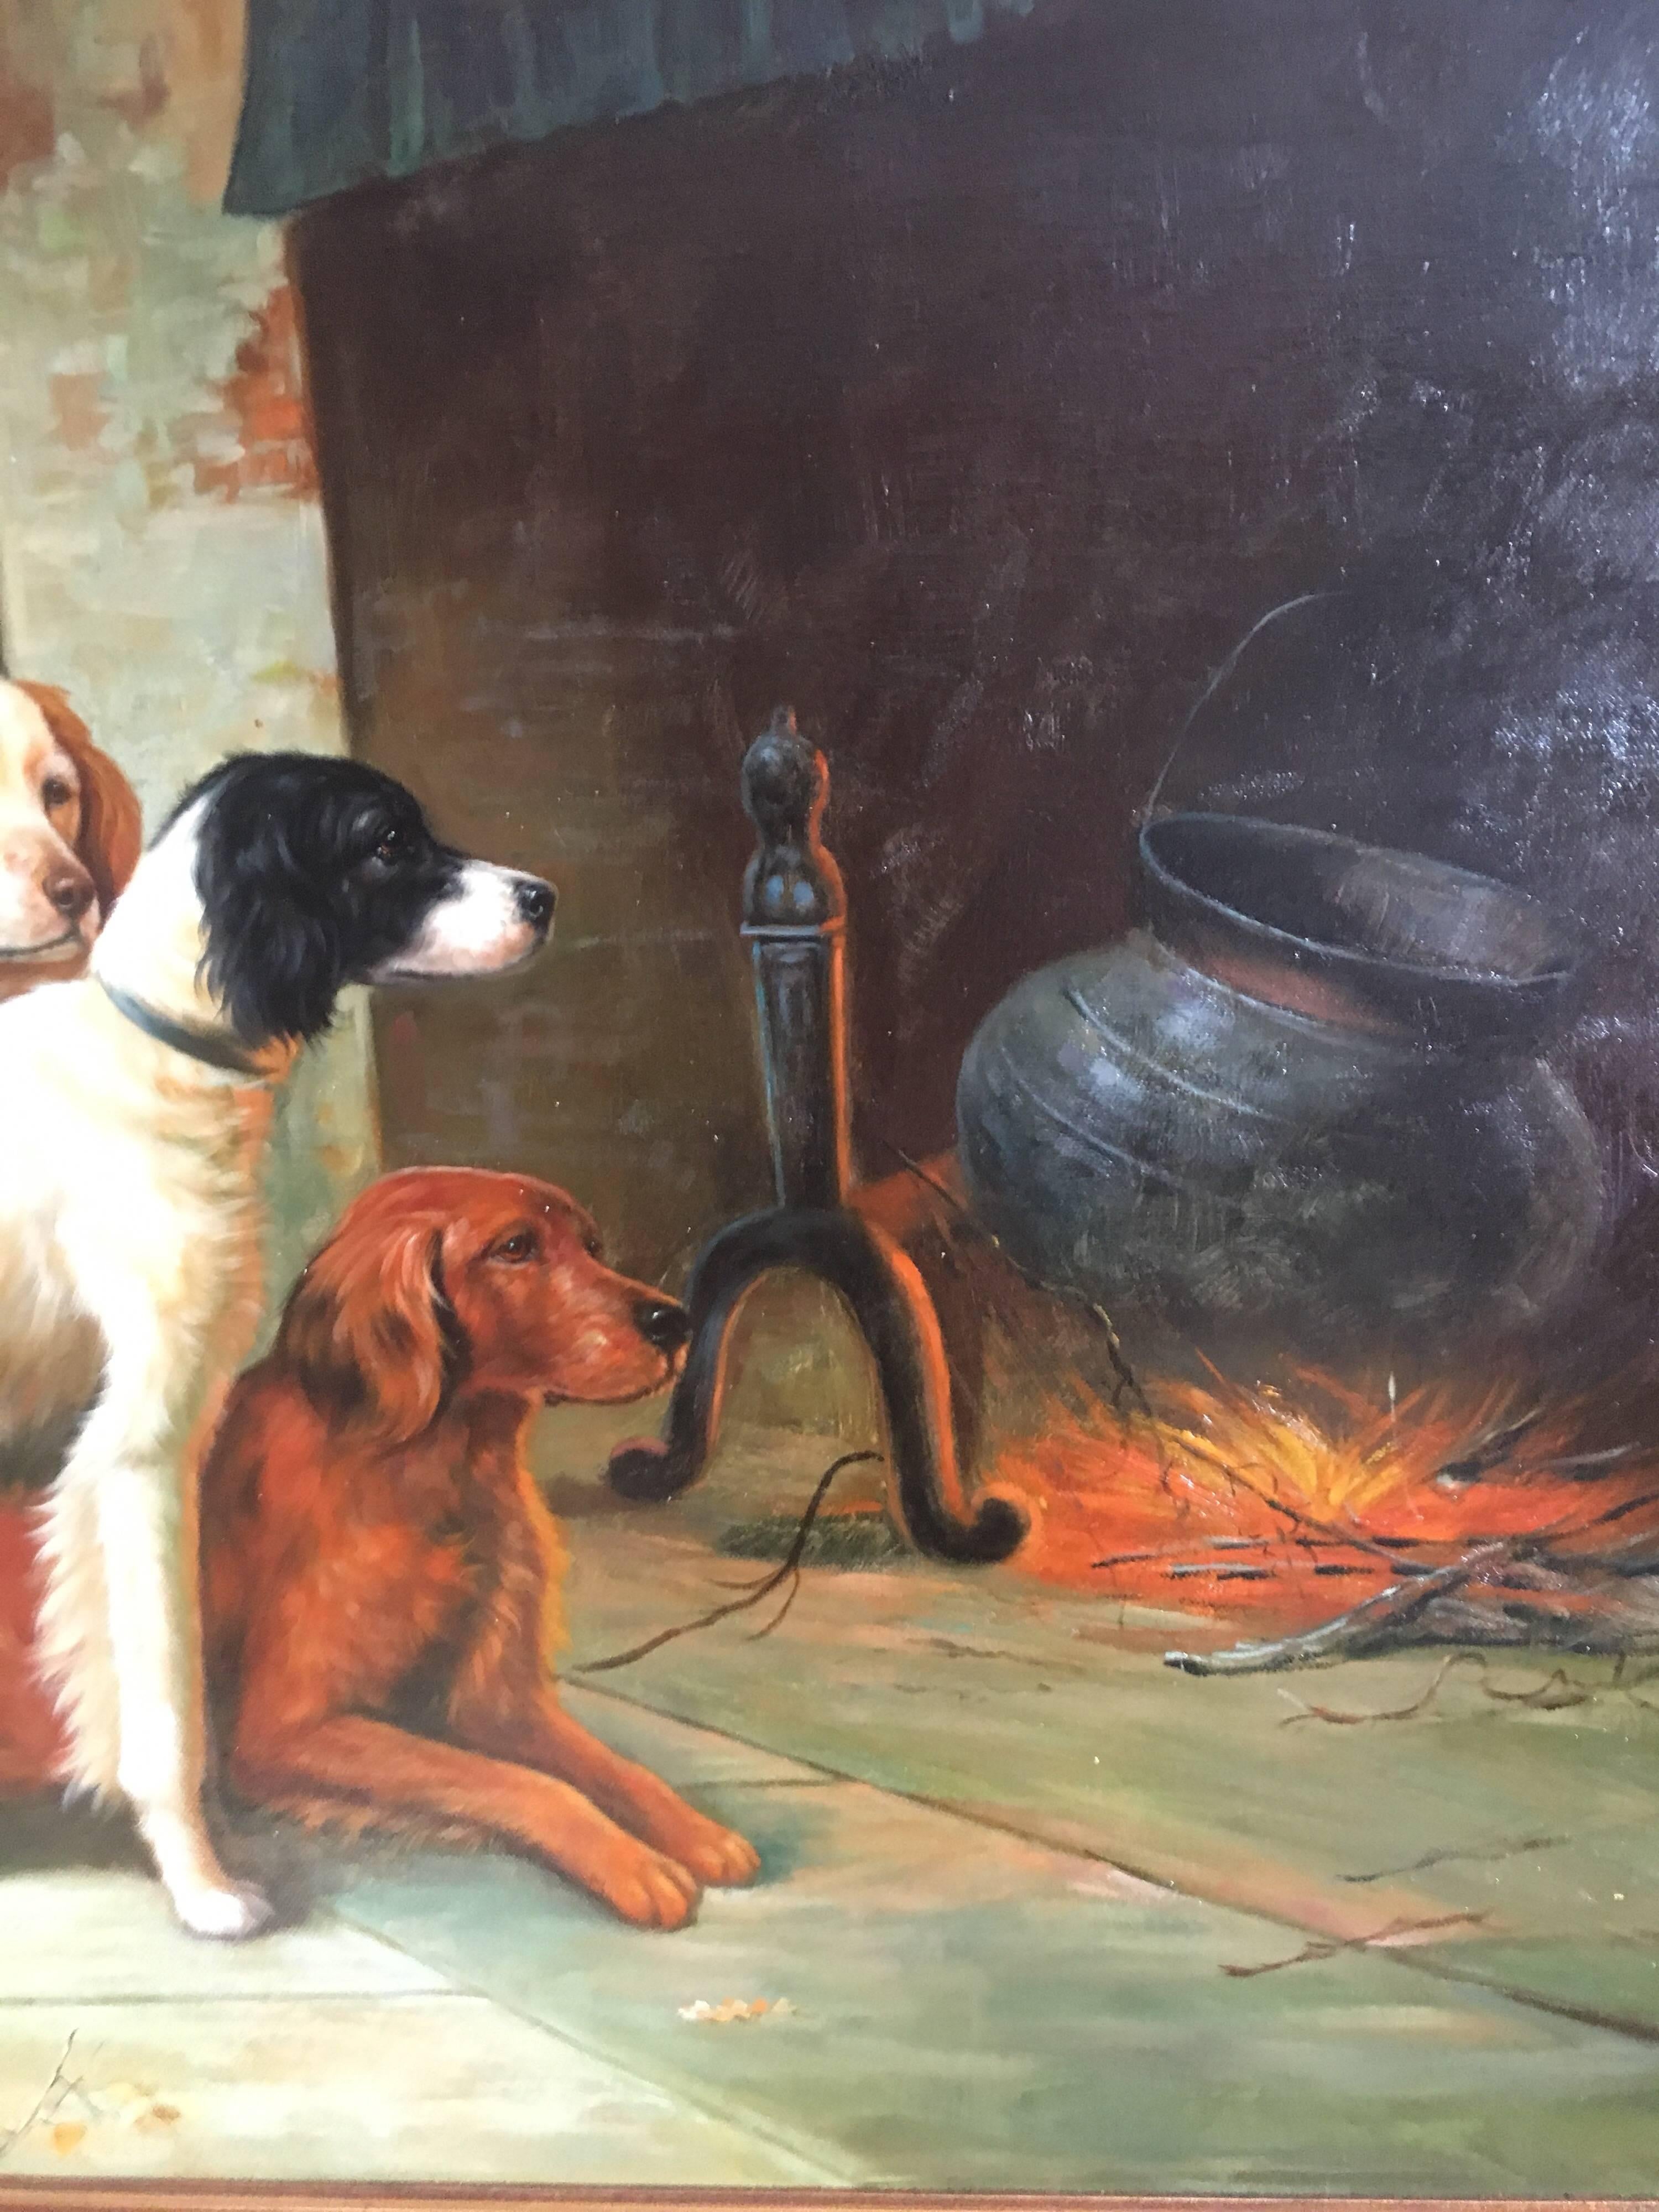 Warming by the Fire
British School, 20th Century,
Oil painting on canvas, framed
Framed size: 30.5 x 34.5 inches

Three English Springer Spaniel dogs enjoying the warmth from an open fire in what looks like a large manor house. The three dogs are